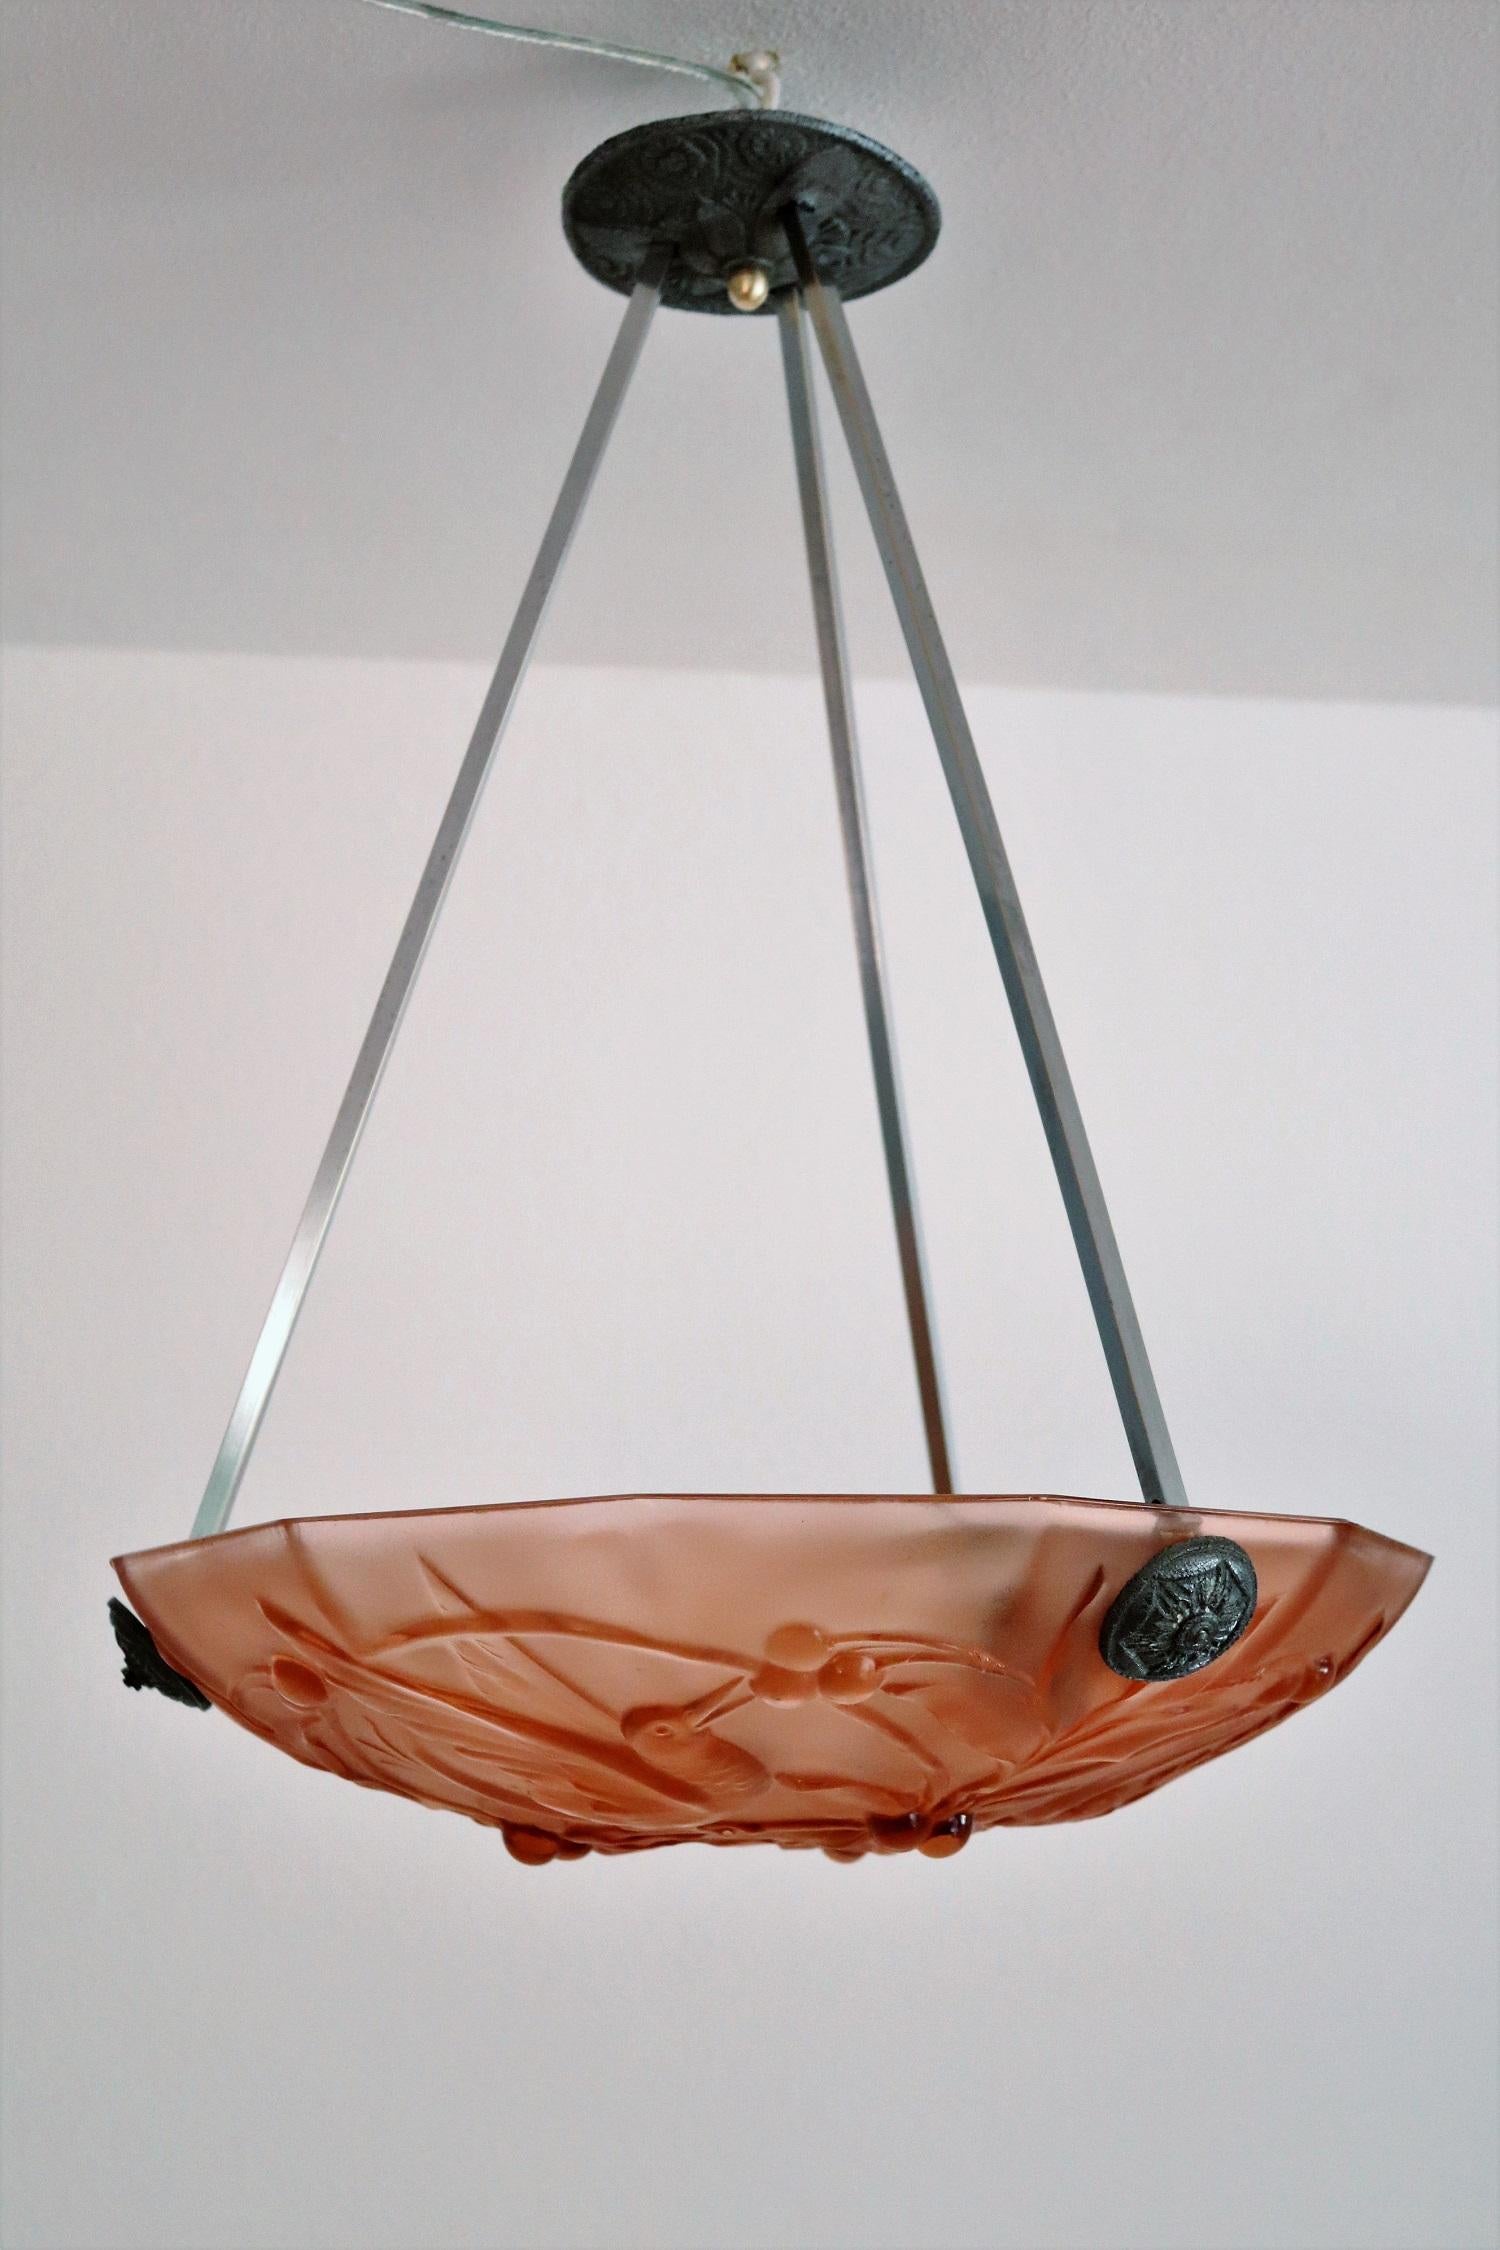 Italian Art Deco Sculptured Glass and Chrome Chandelier in Pink, 1940s For Sale 13